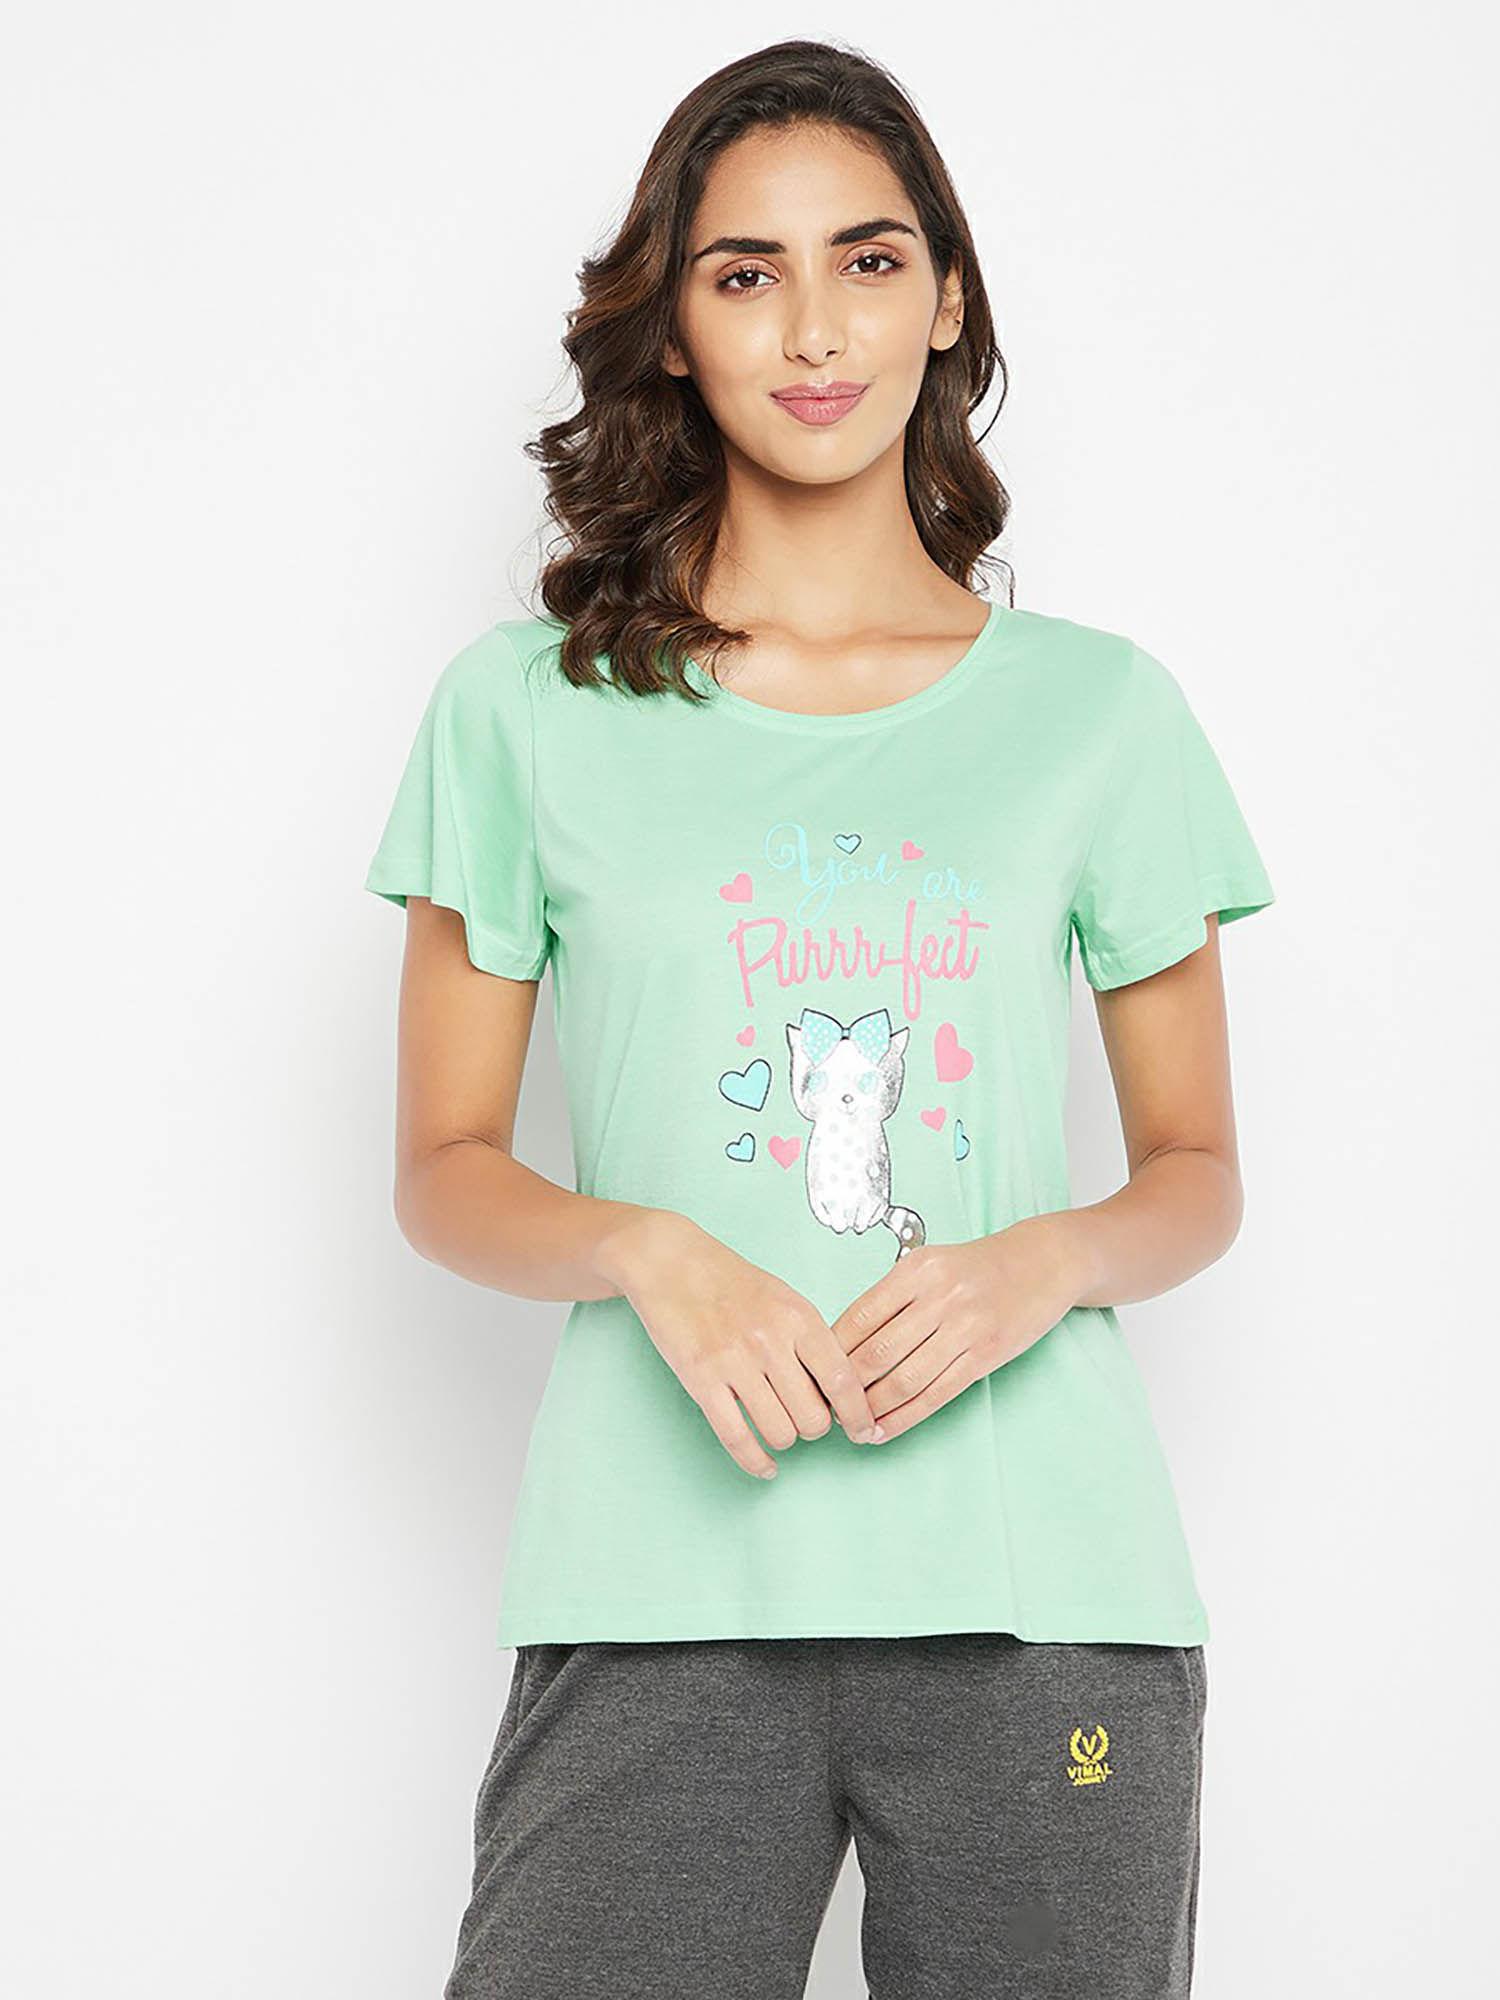 graphic & text print top in sky blue - 100 percent cotton